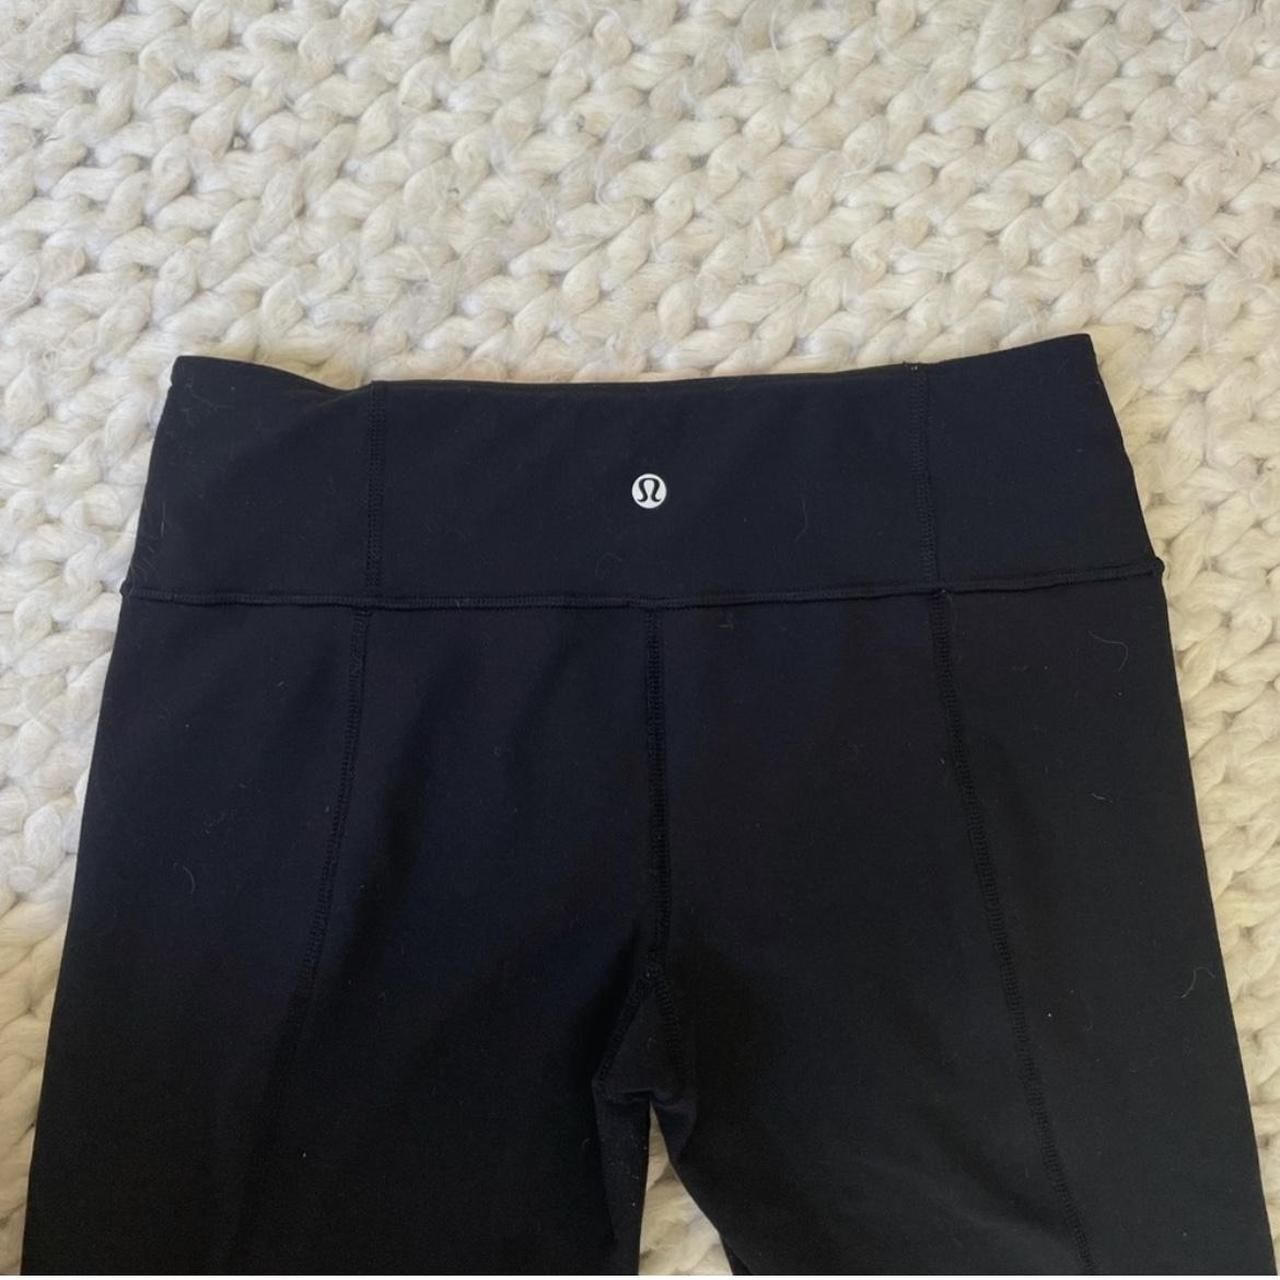 Lululemon Groove Pant, Reversible, one side is all